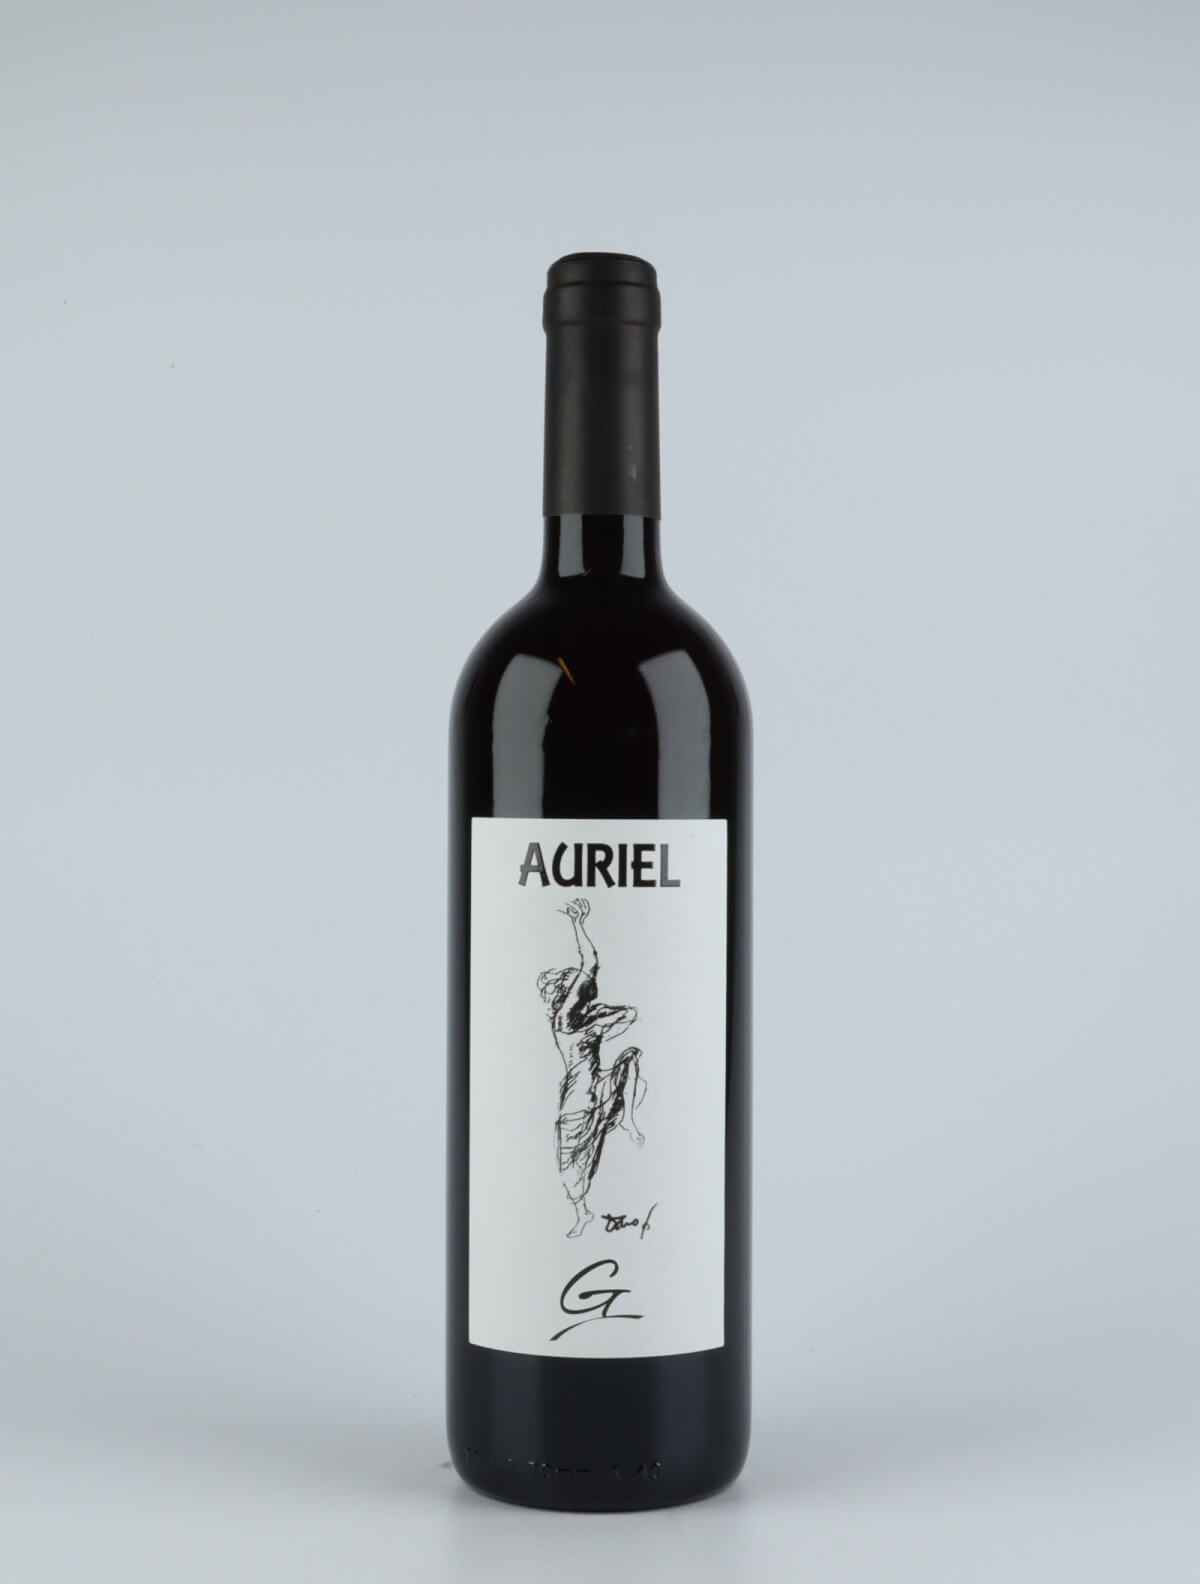 A bottle 2018 G Red wine from Auriel, Piedmont in Italy